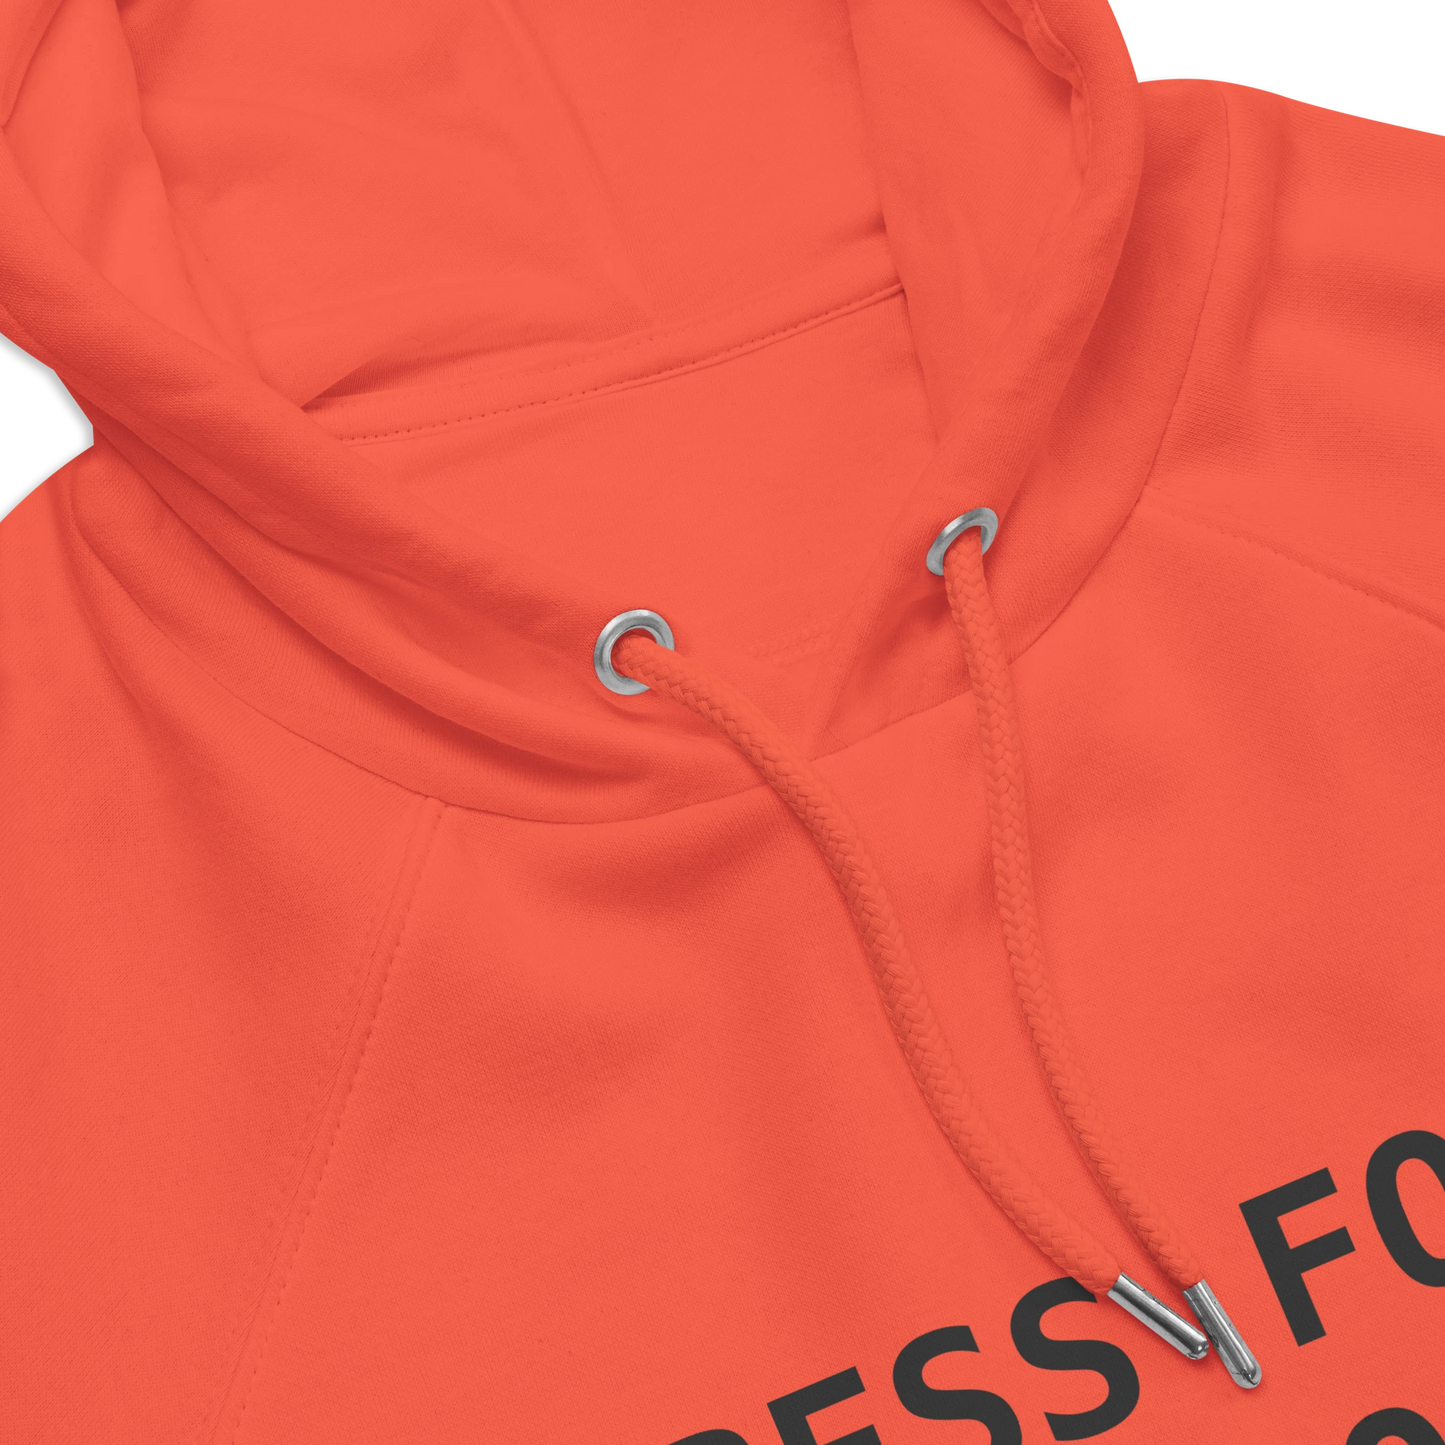 Dress for the job you want premium hoodie product details product details product details